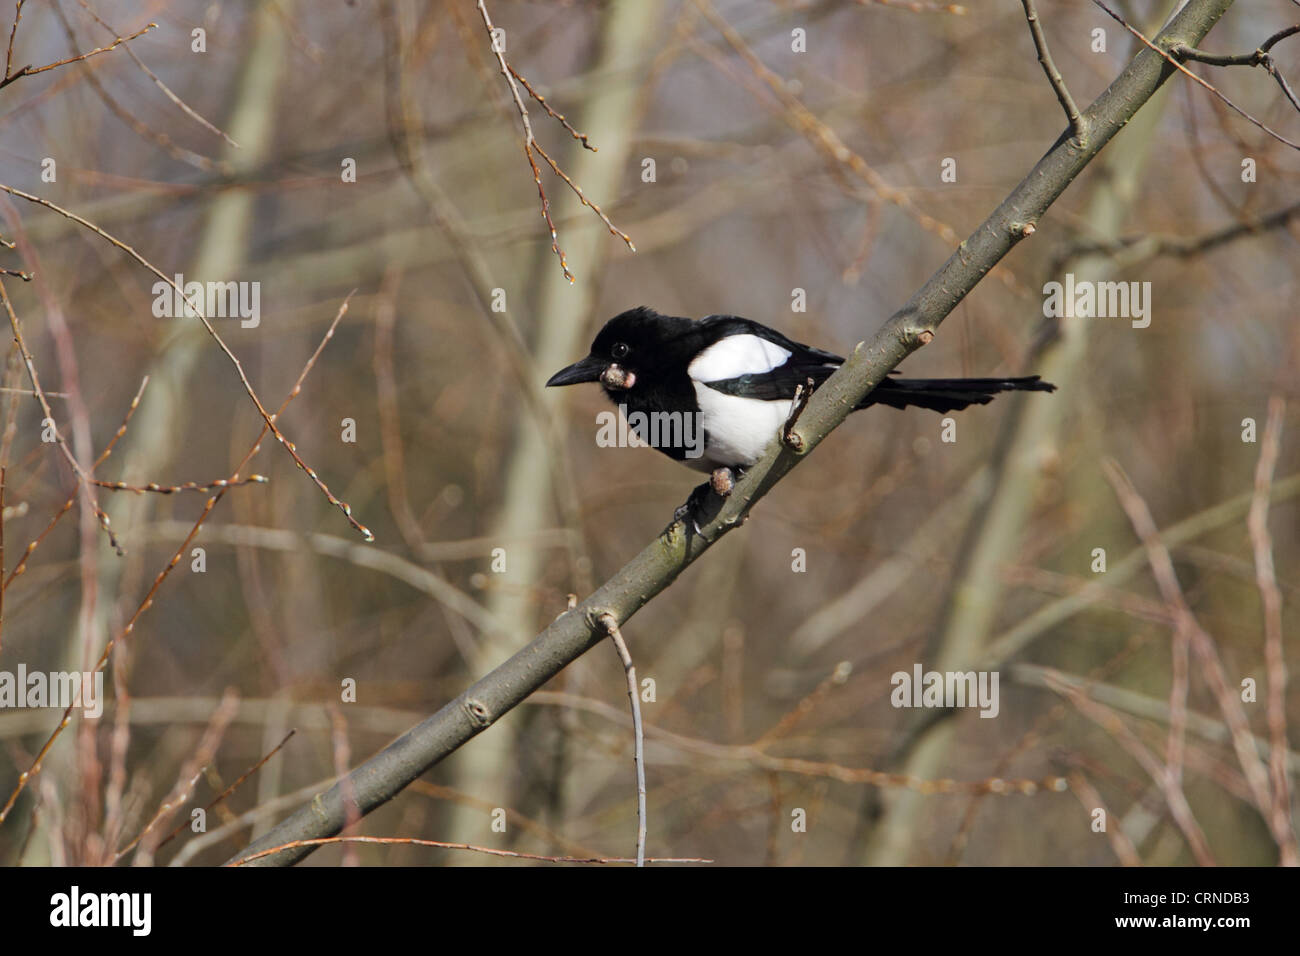 Common Magpie (Pica pica) adult, with tumor growth on head and feet, perched on branch in woodland, Hertfordshire, England, Stock Photo